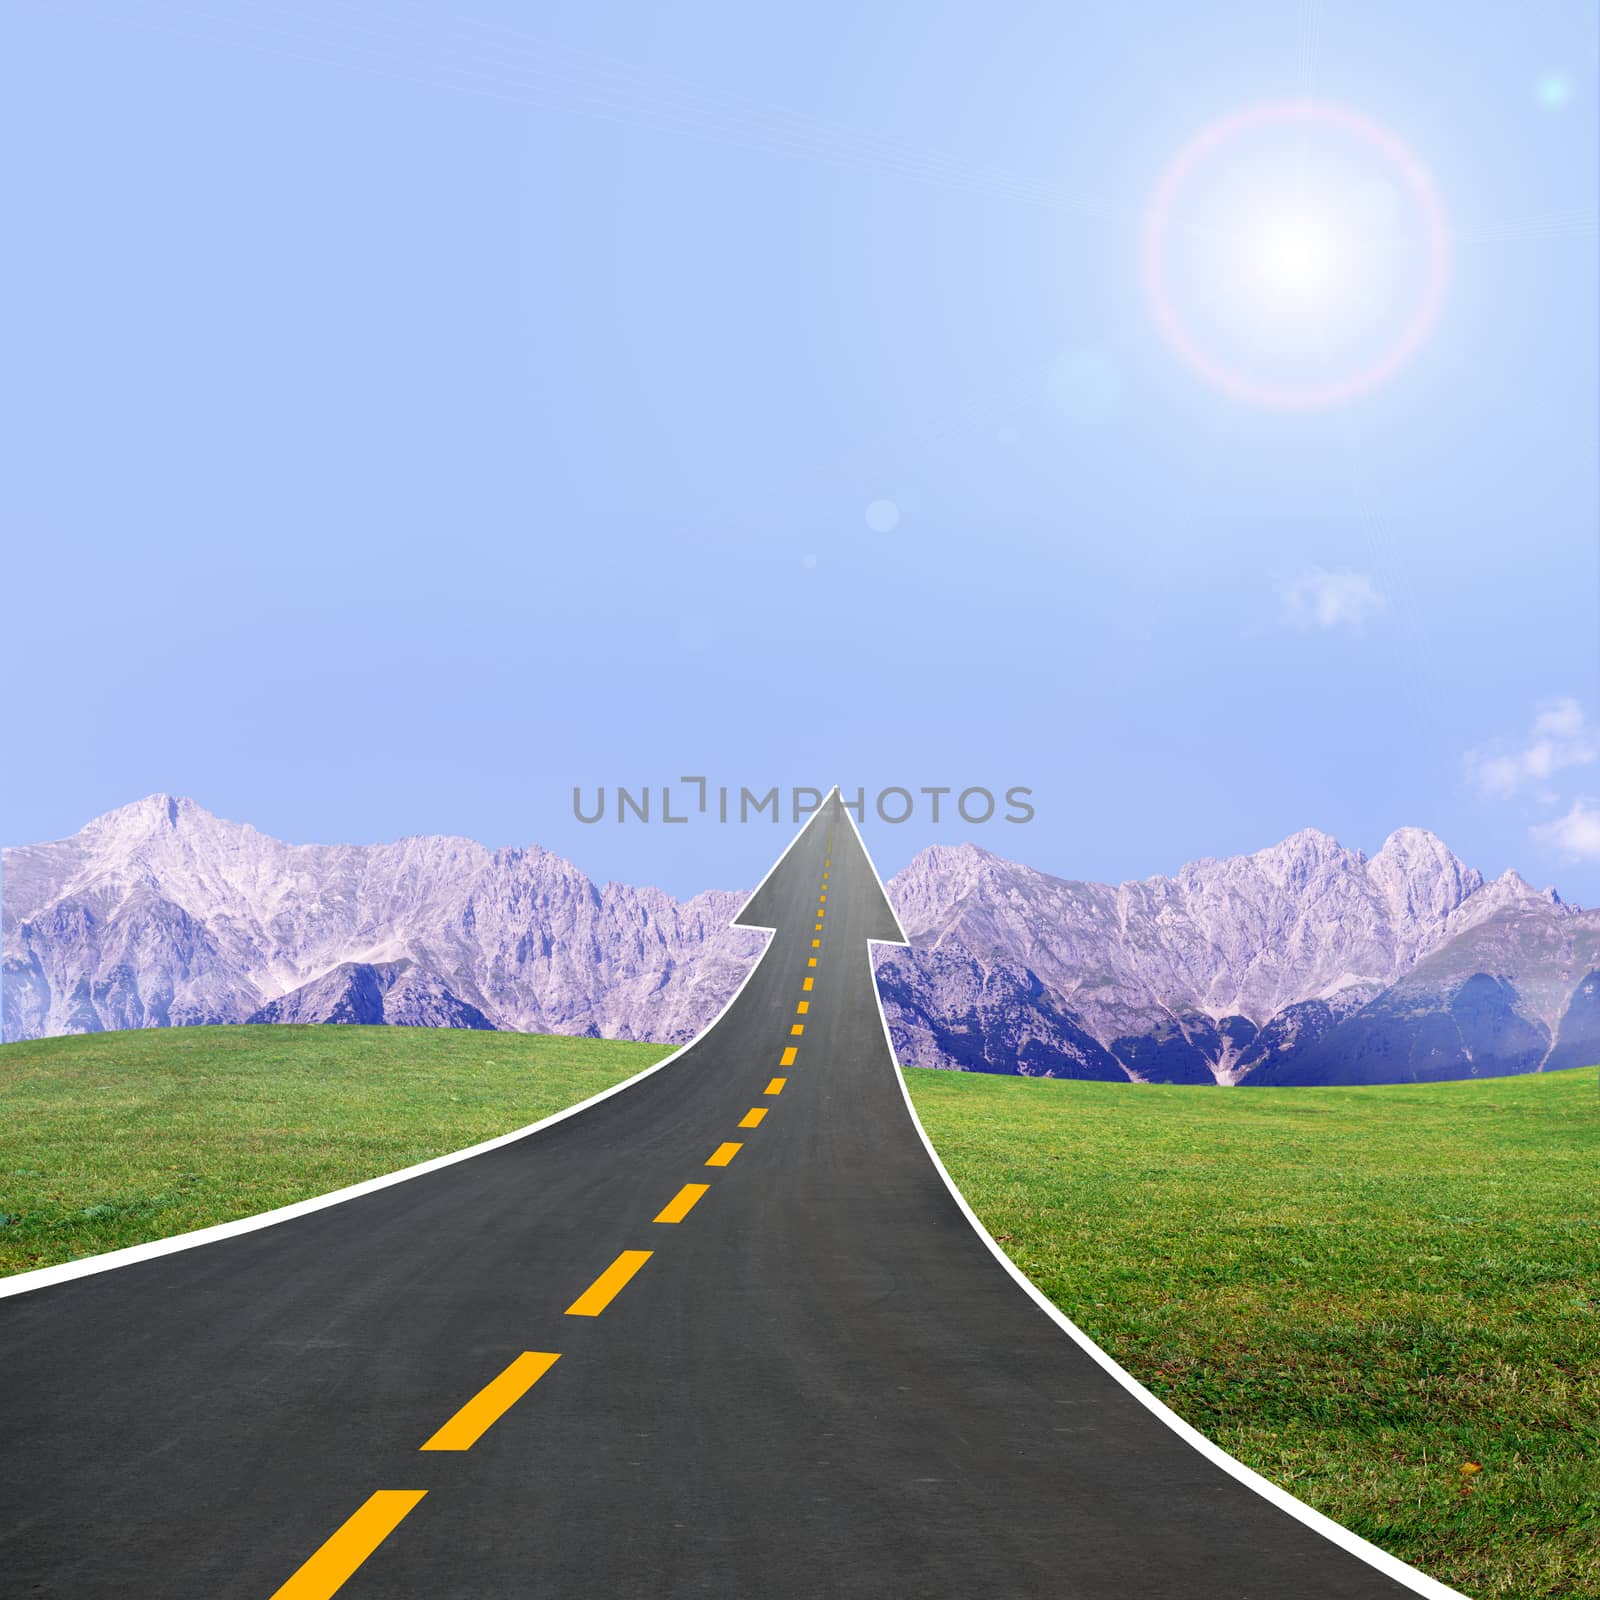 Highway road going up llike arrow in sky with mountains